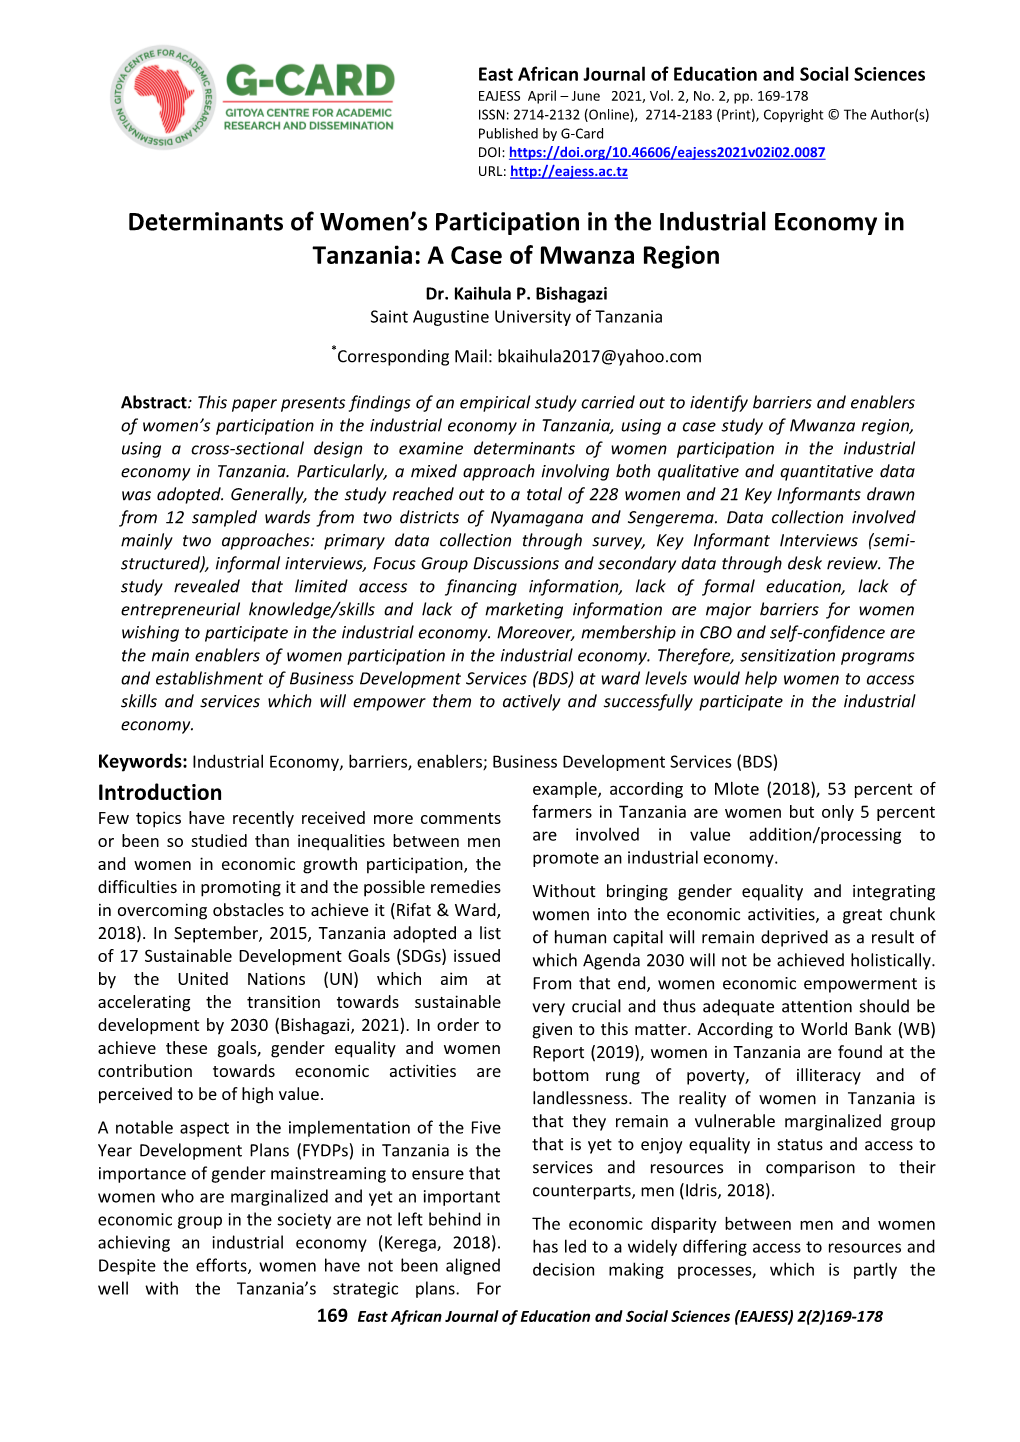 Determinants of Women's Participation in the Industrial